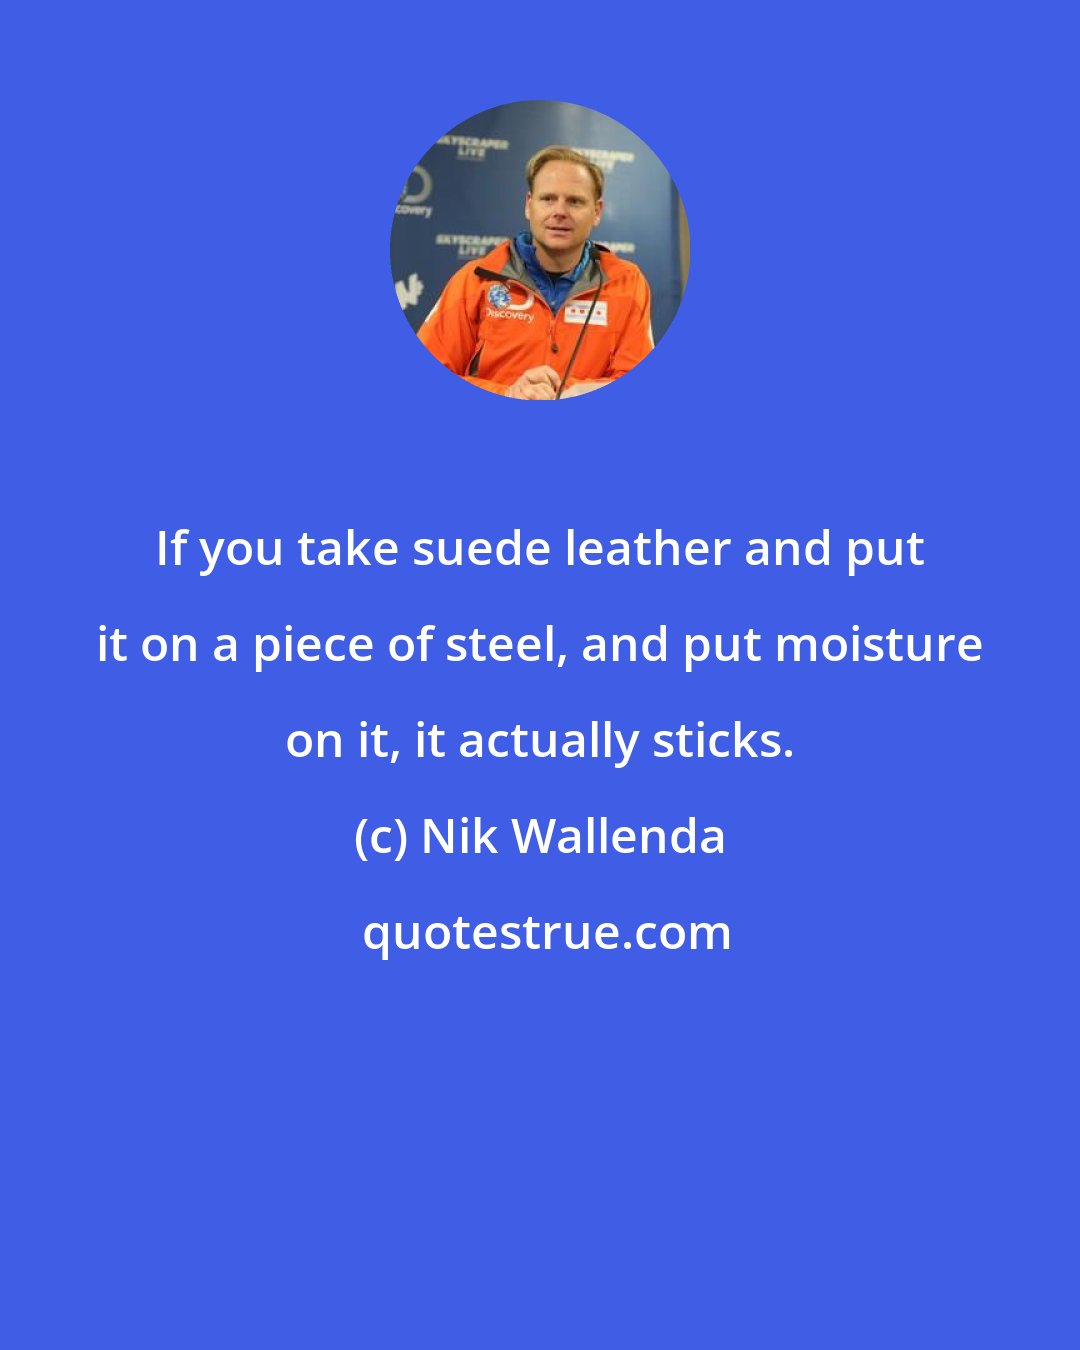 Nik Wallenda: If you take suede leather and put it on a piece of steel, and put moisture on it, it actually sticks.